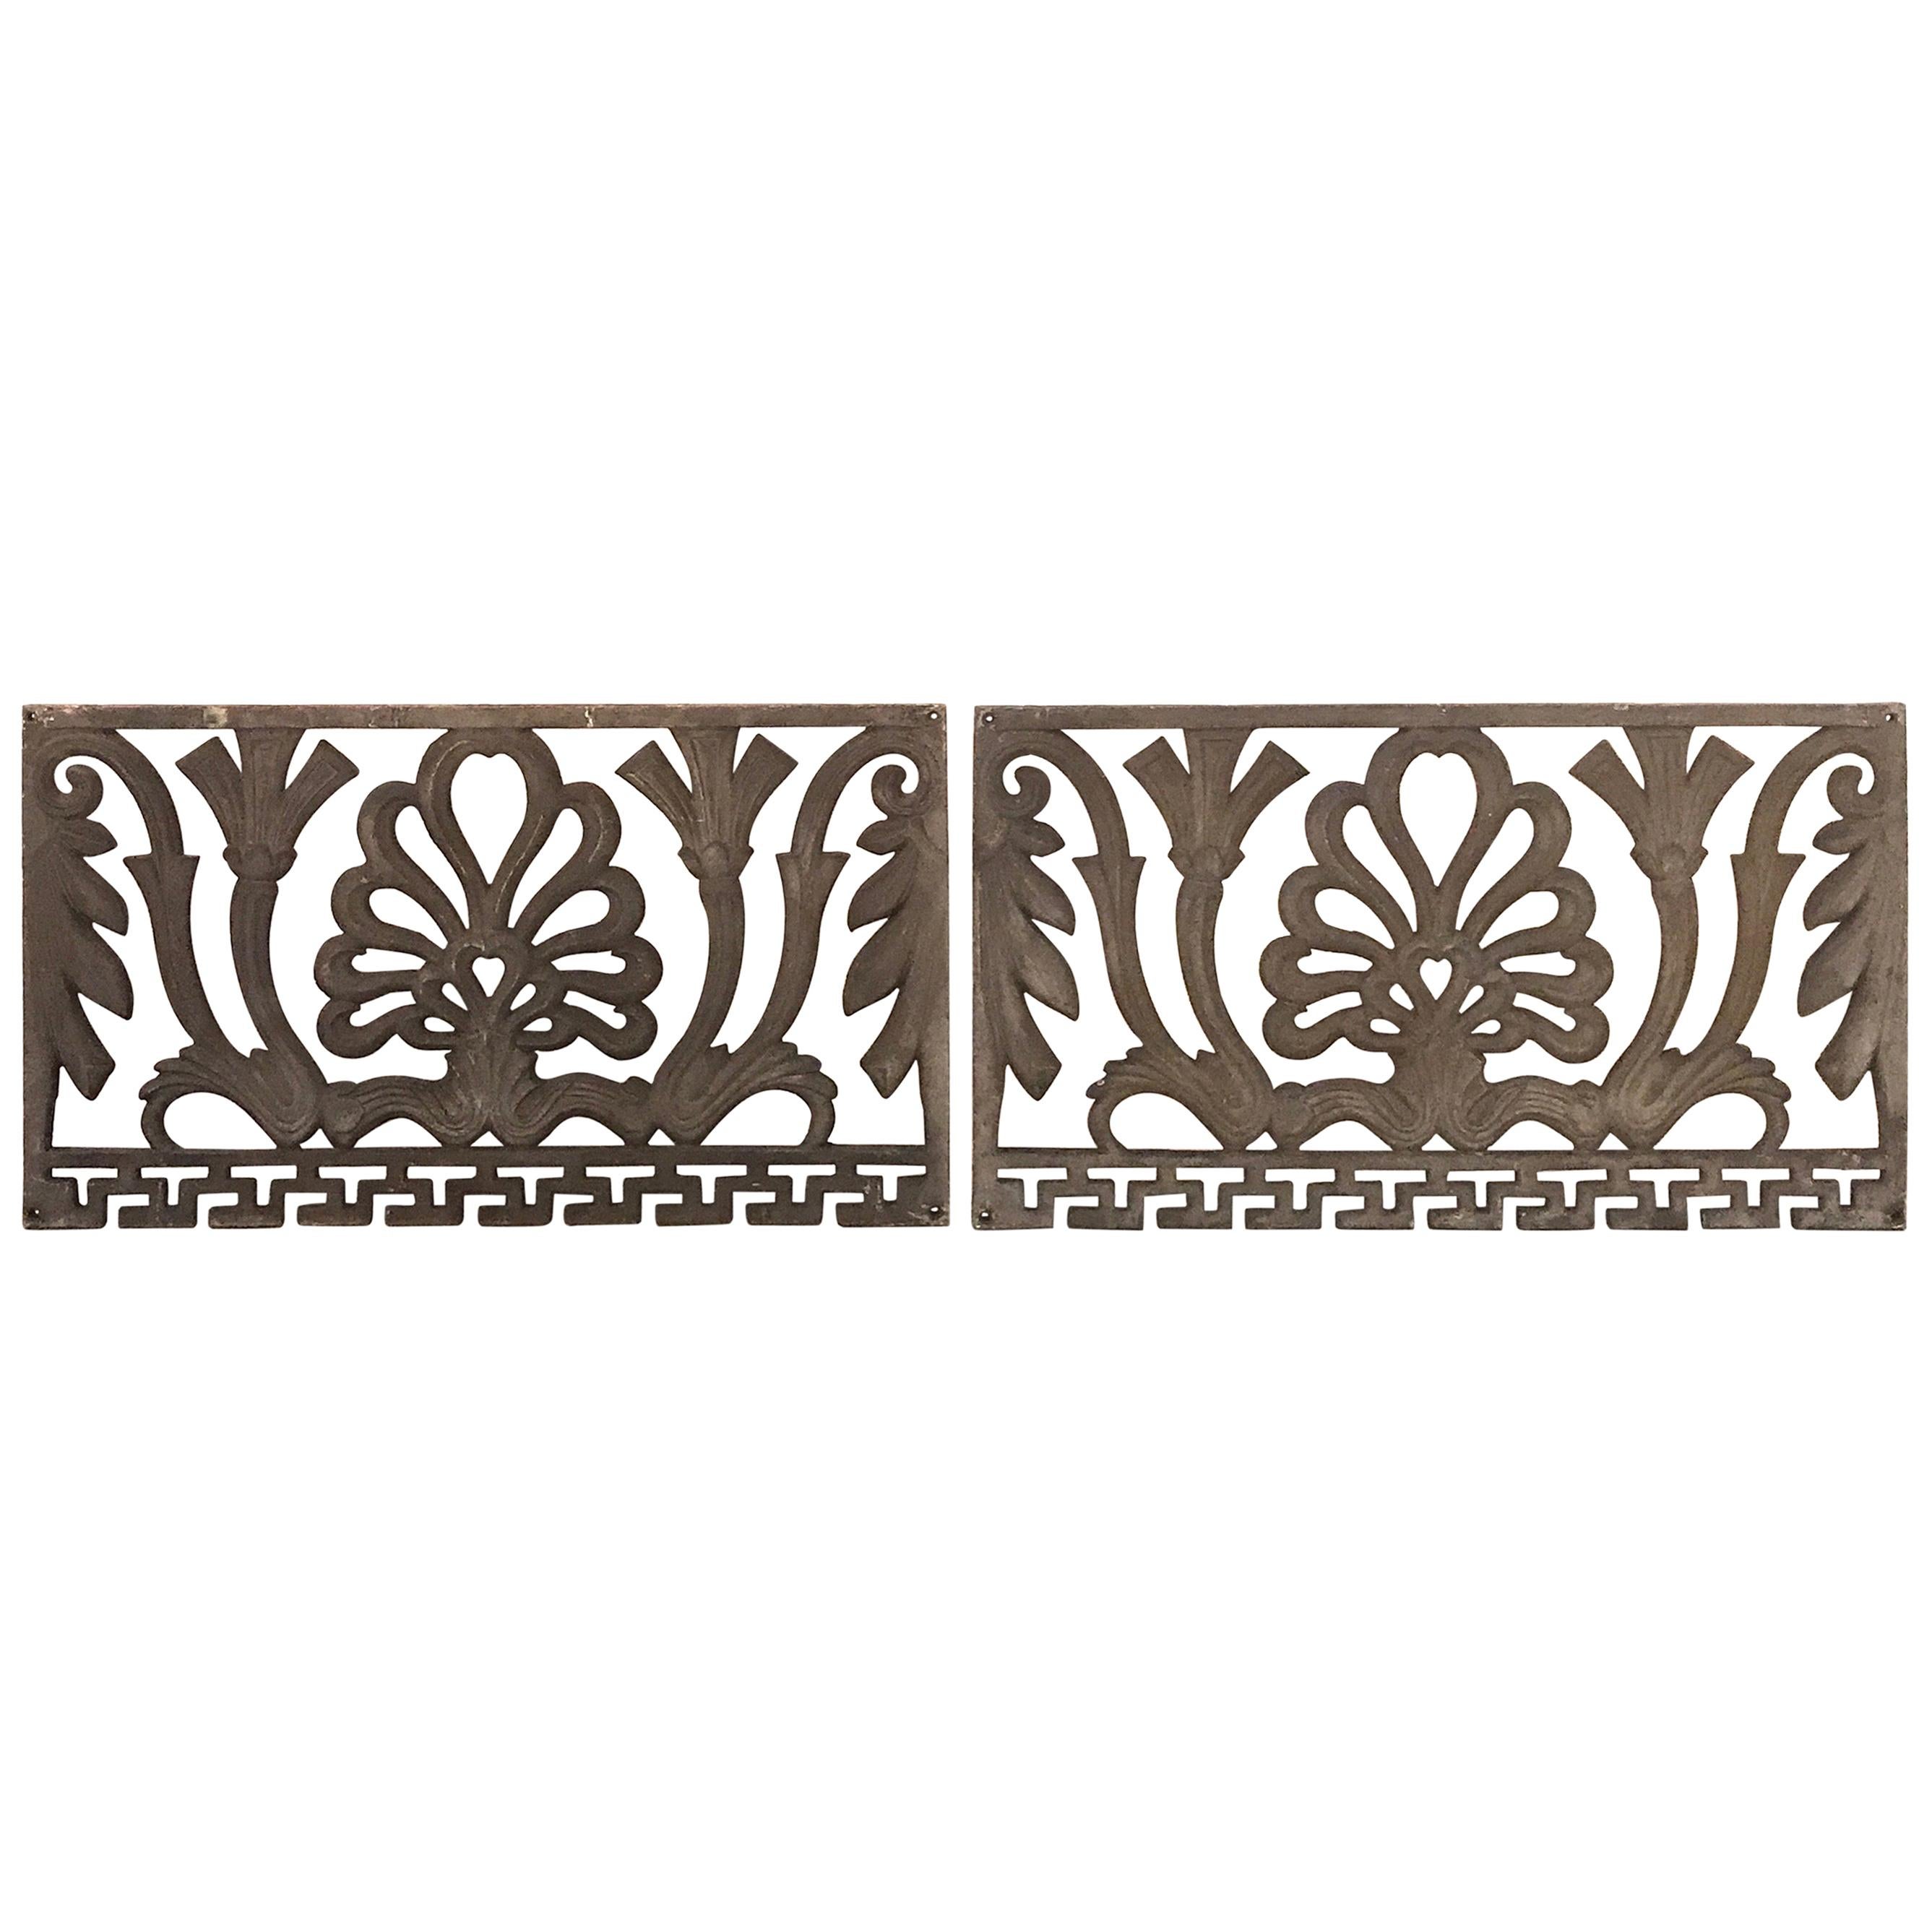 Pair of Art Nouveau Architectural Panels, Early 20th Century